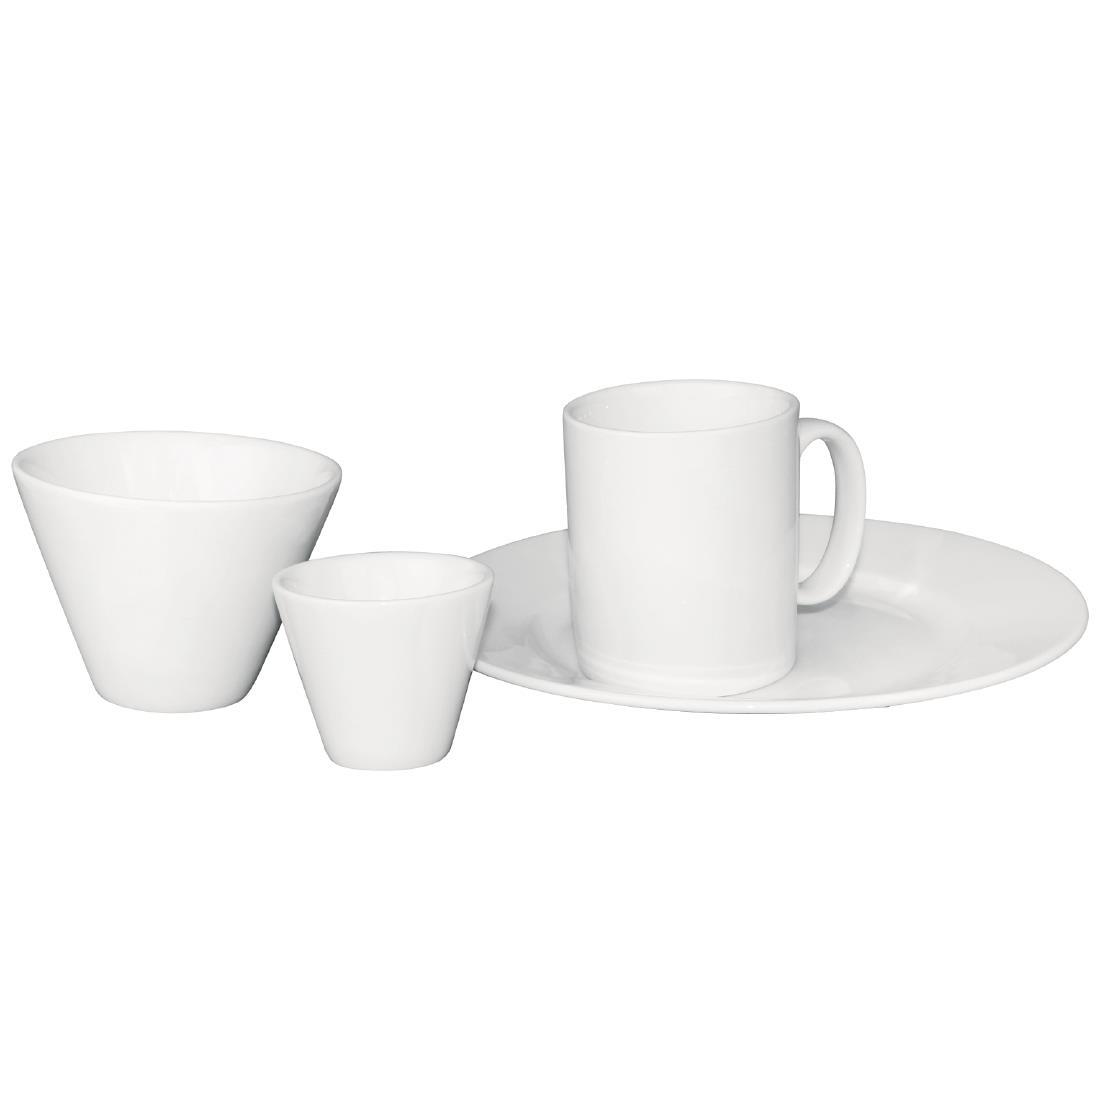 Olympia Conical Ramekin White 110mm (Pack of 6) - CM165  - 3